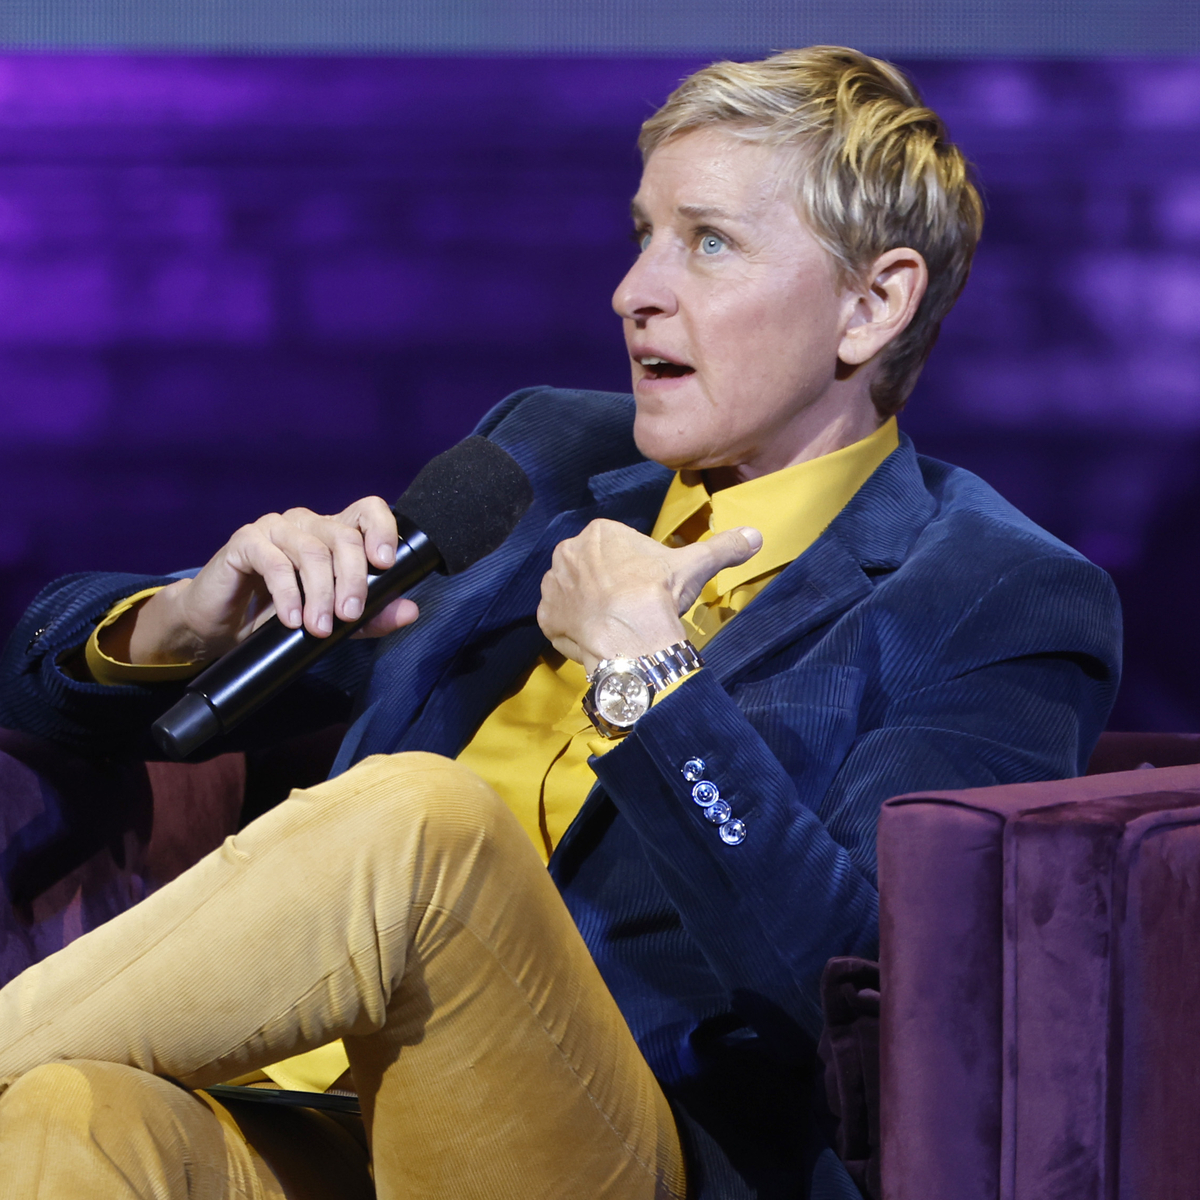 Ellen DeGeneres Says She Was "Kicked Out of Show Business" for Being "Mean"